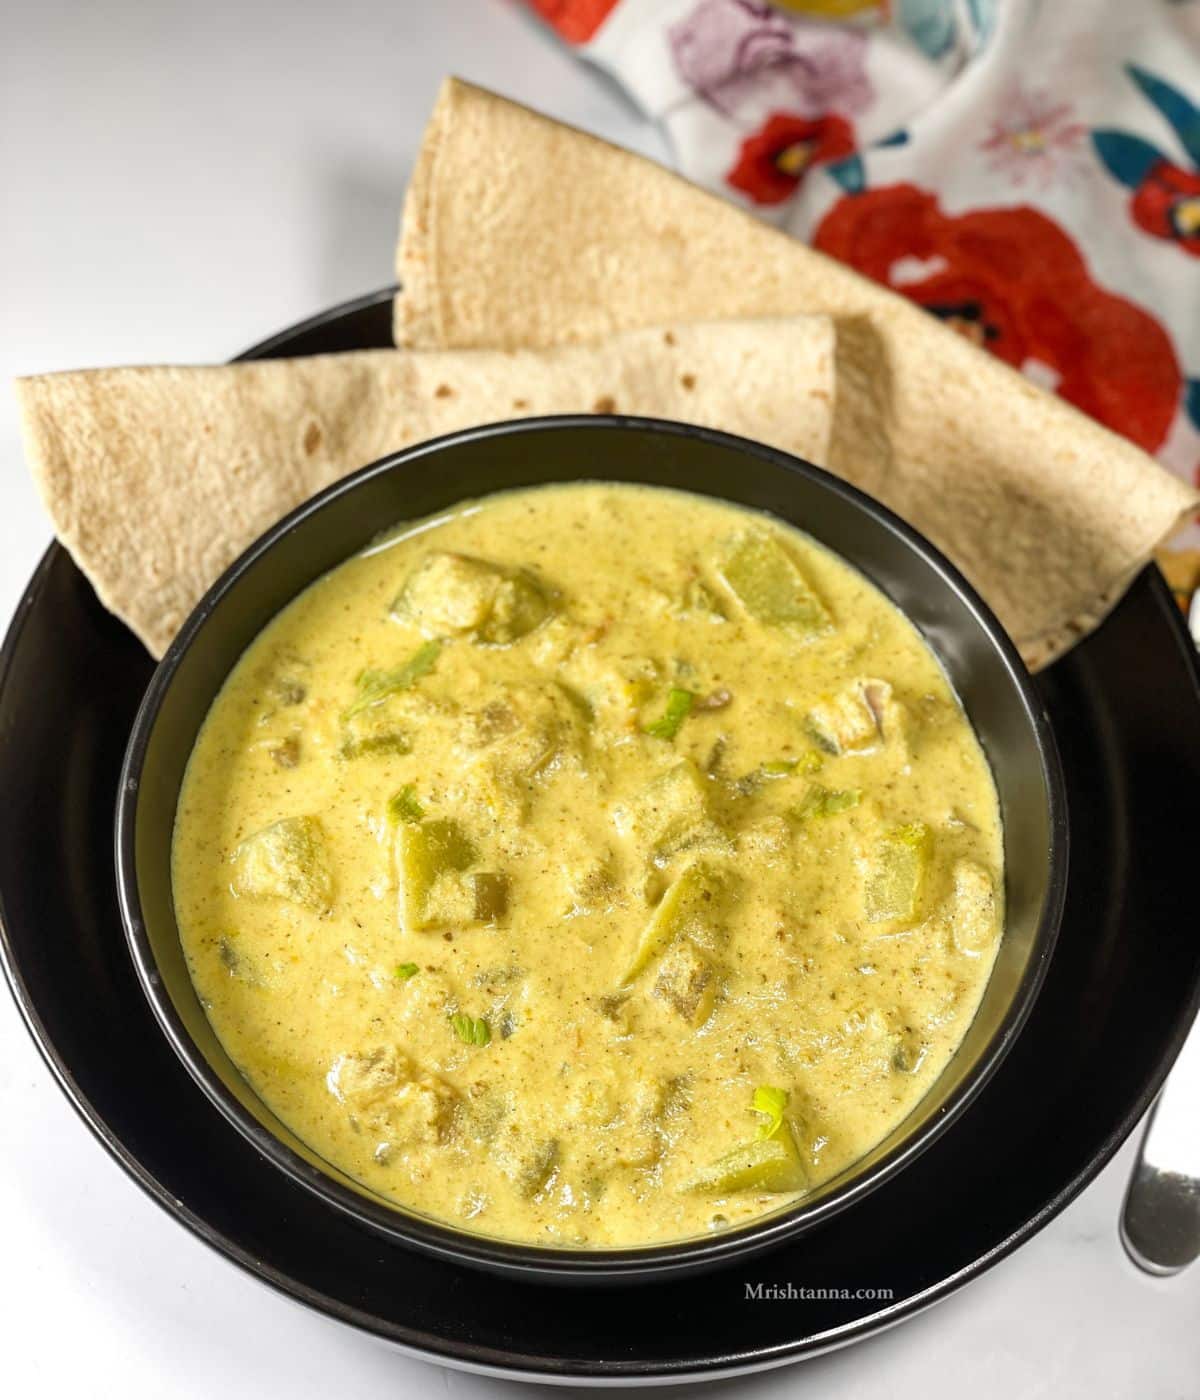 A bowl of bottle gourd kurma is on the plate with rotis.